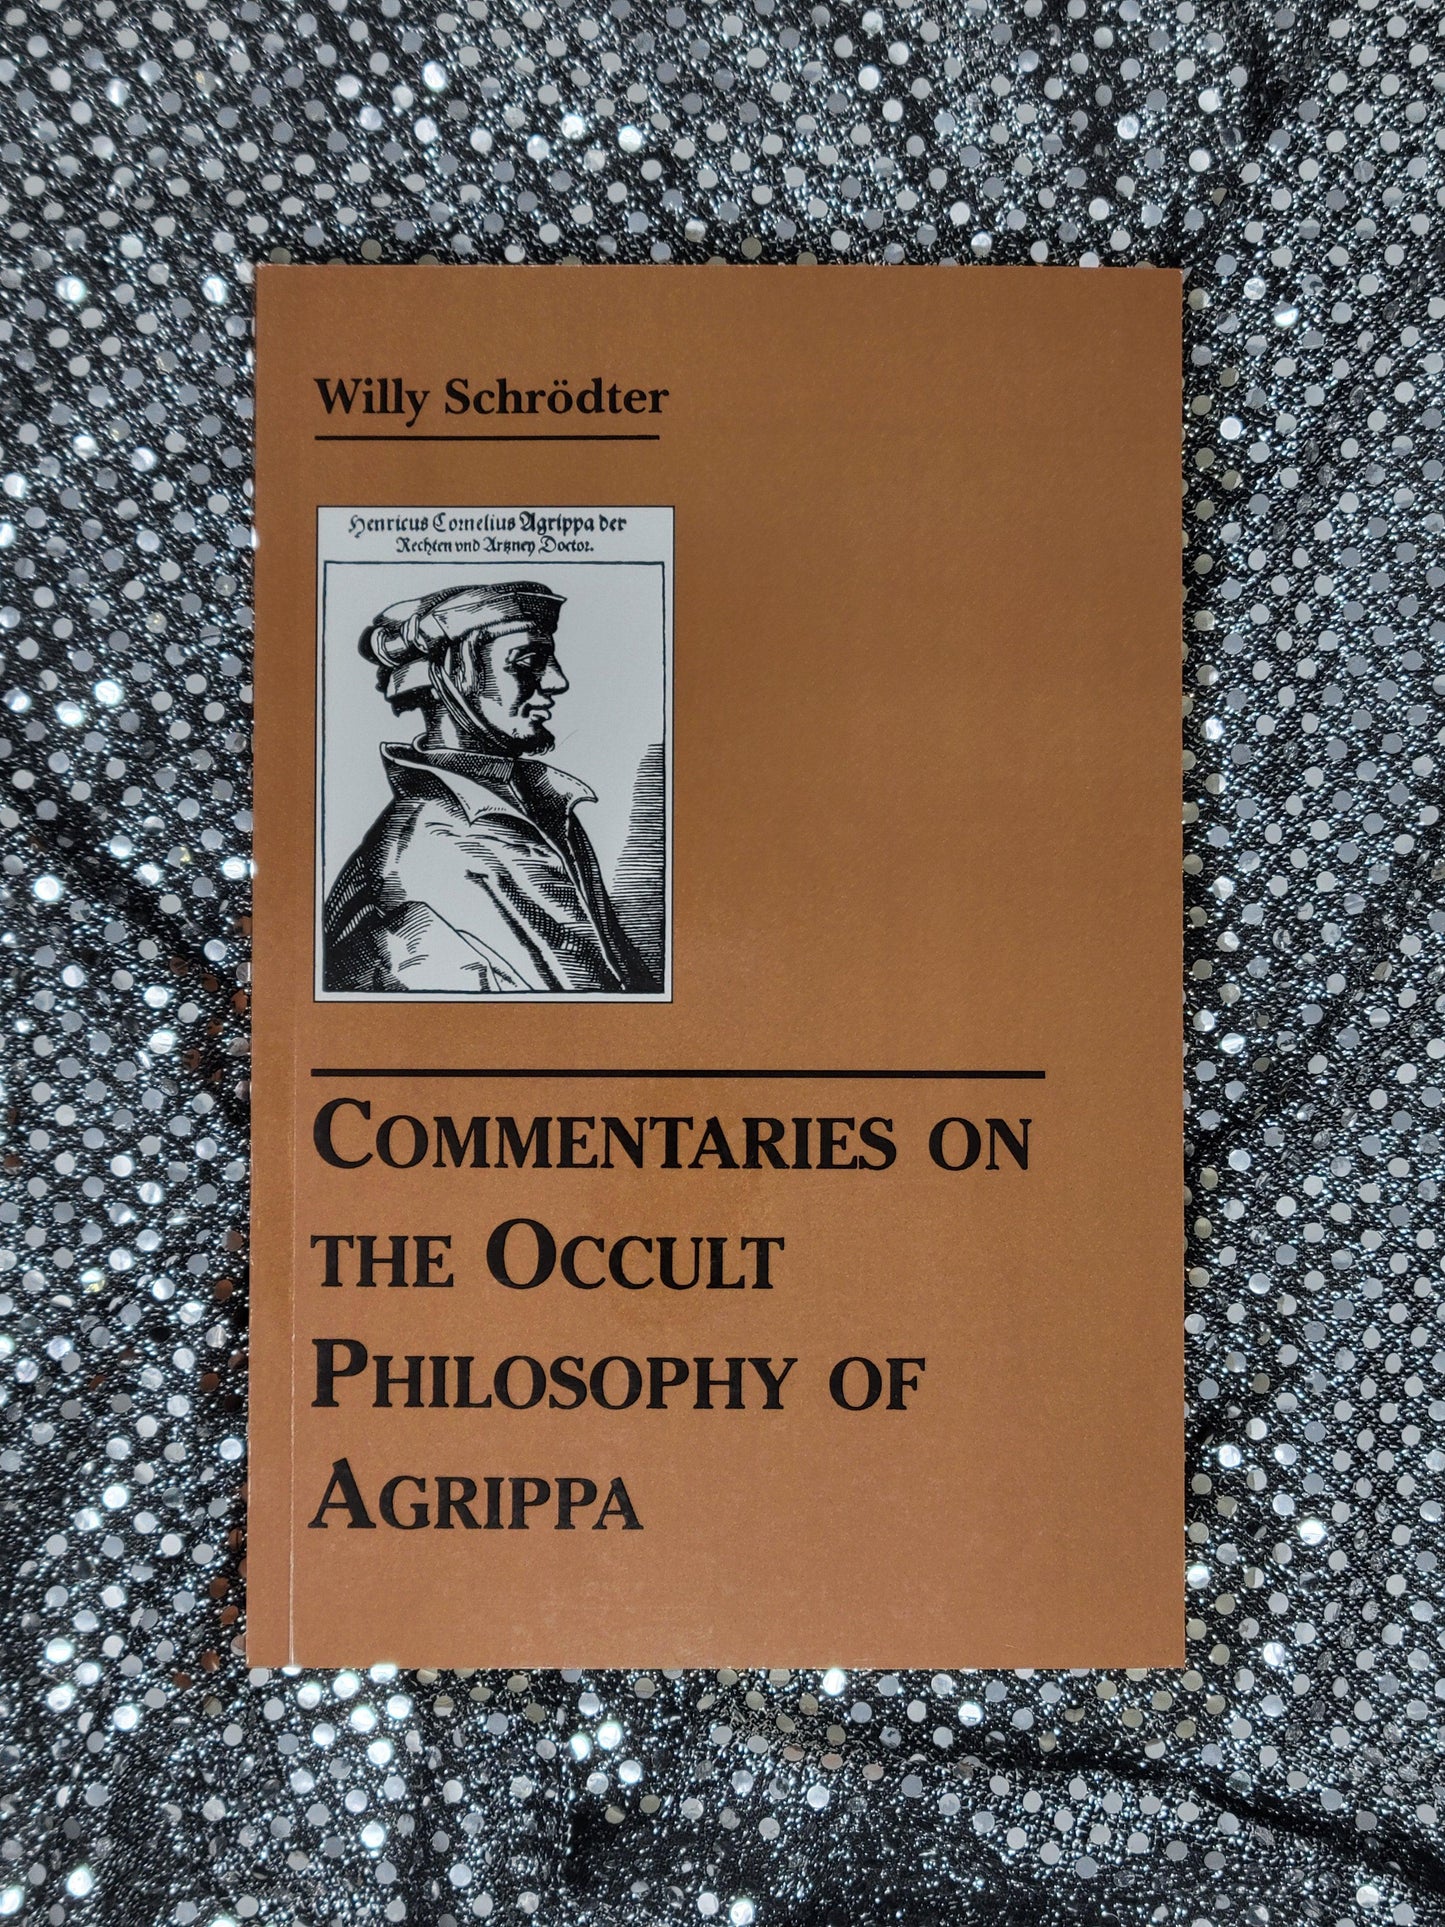 Commentaries on the Occult Philosophy of Agrippa - Willy Schroedter